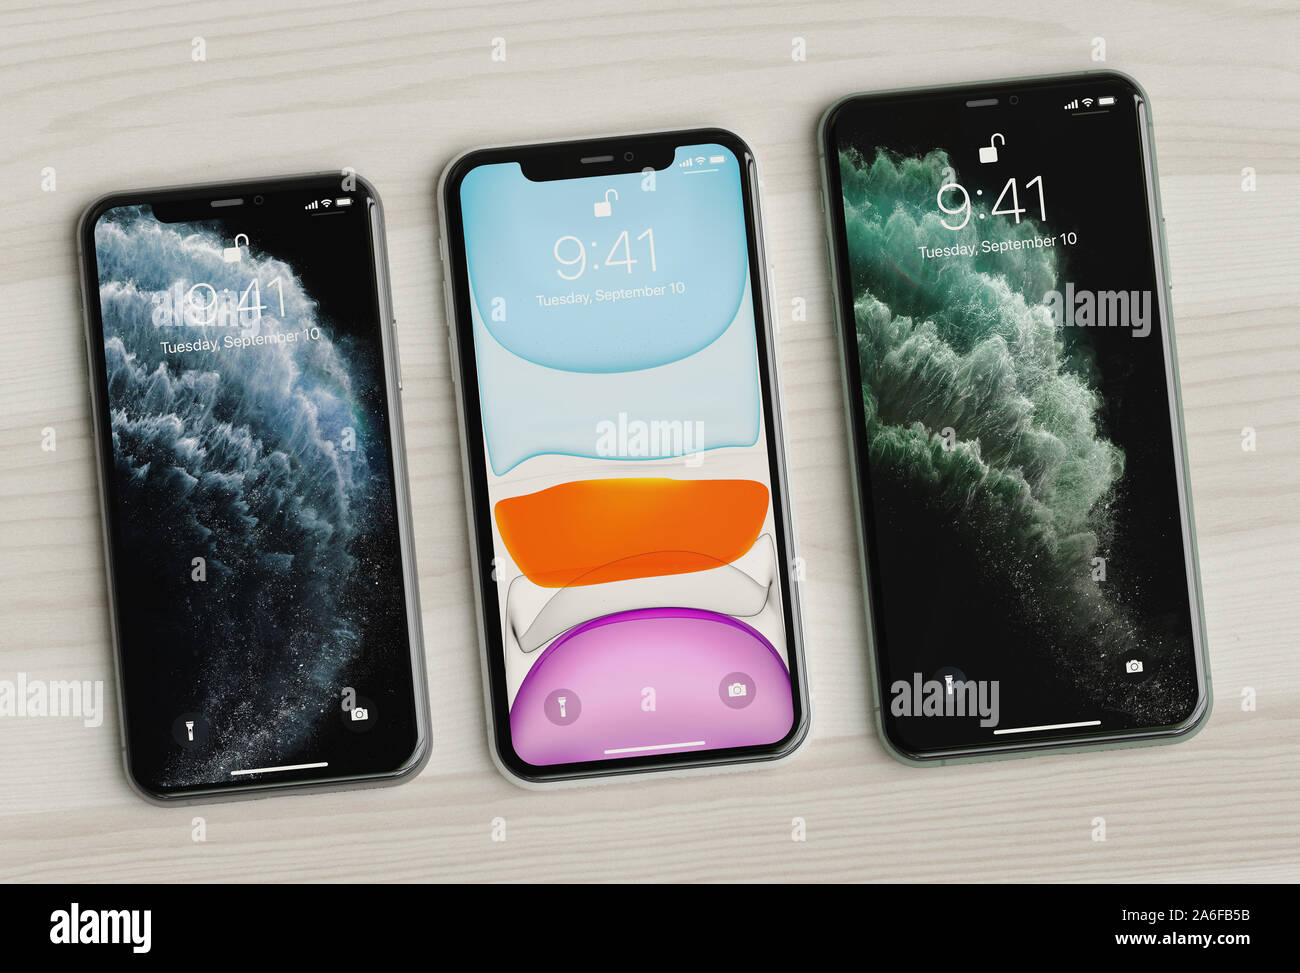 ITALY -22 SEPTEMBER, 2019: Iphone 11, 11 Pro and 11 Max smartphones on table. Latest Apple Mobile iphones model. Illustrative editorial. Stock Photo